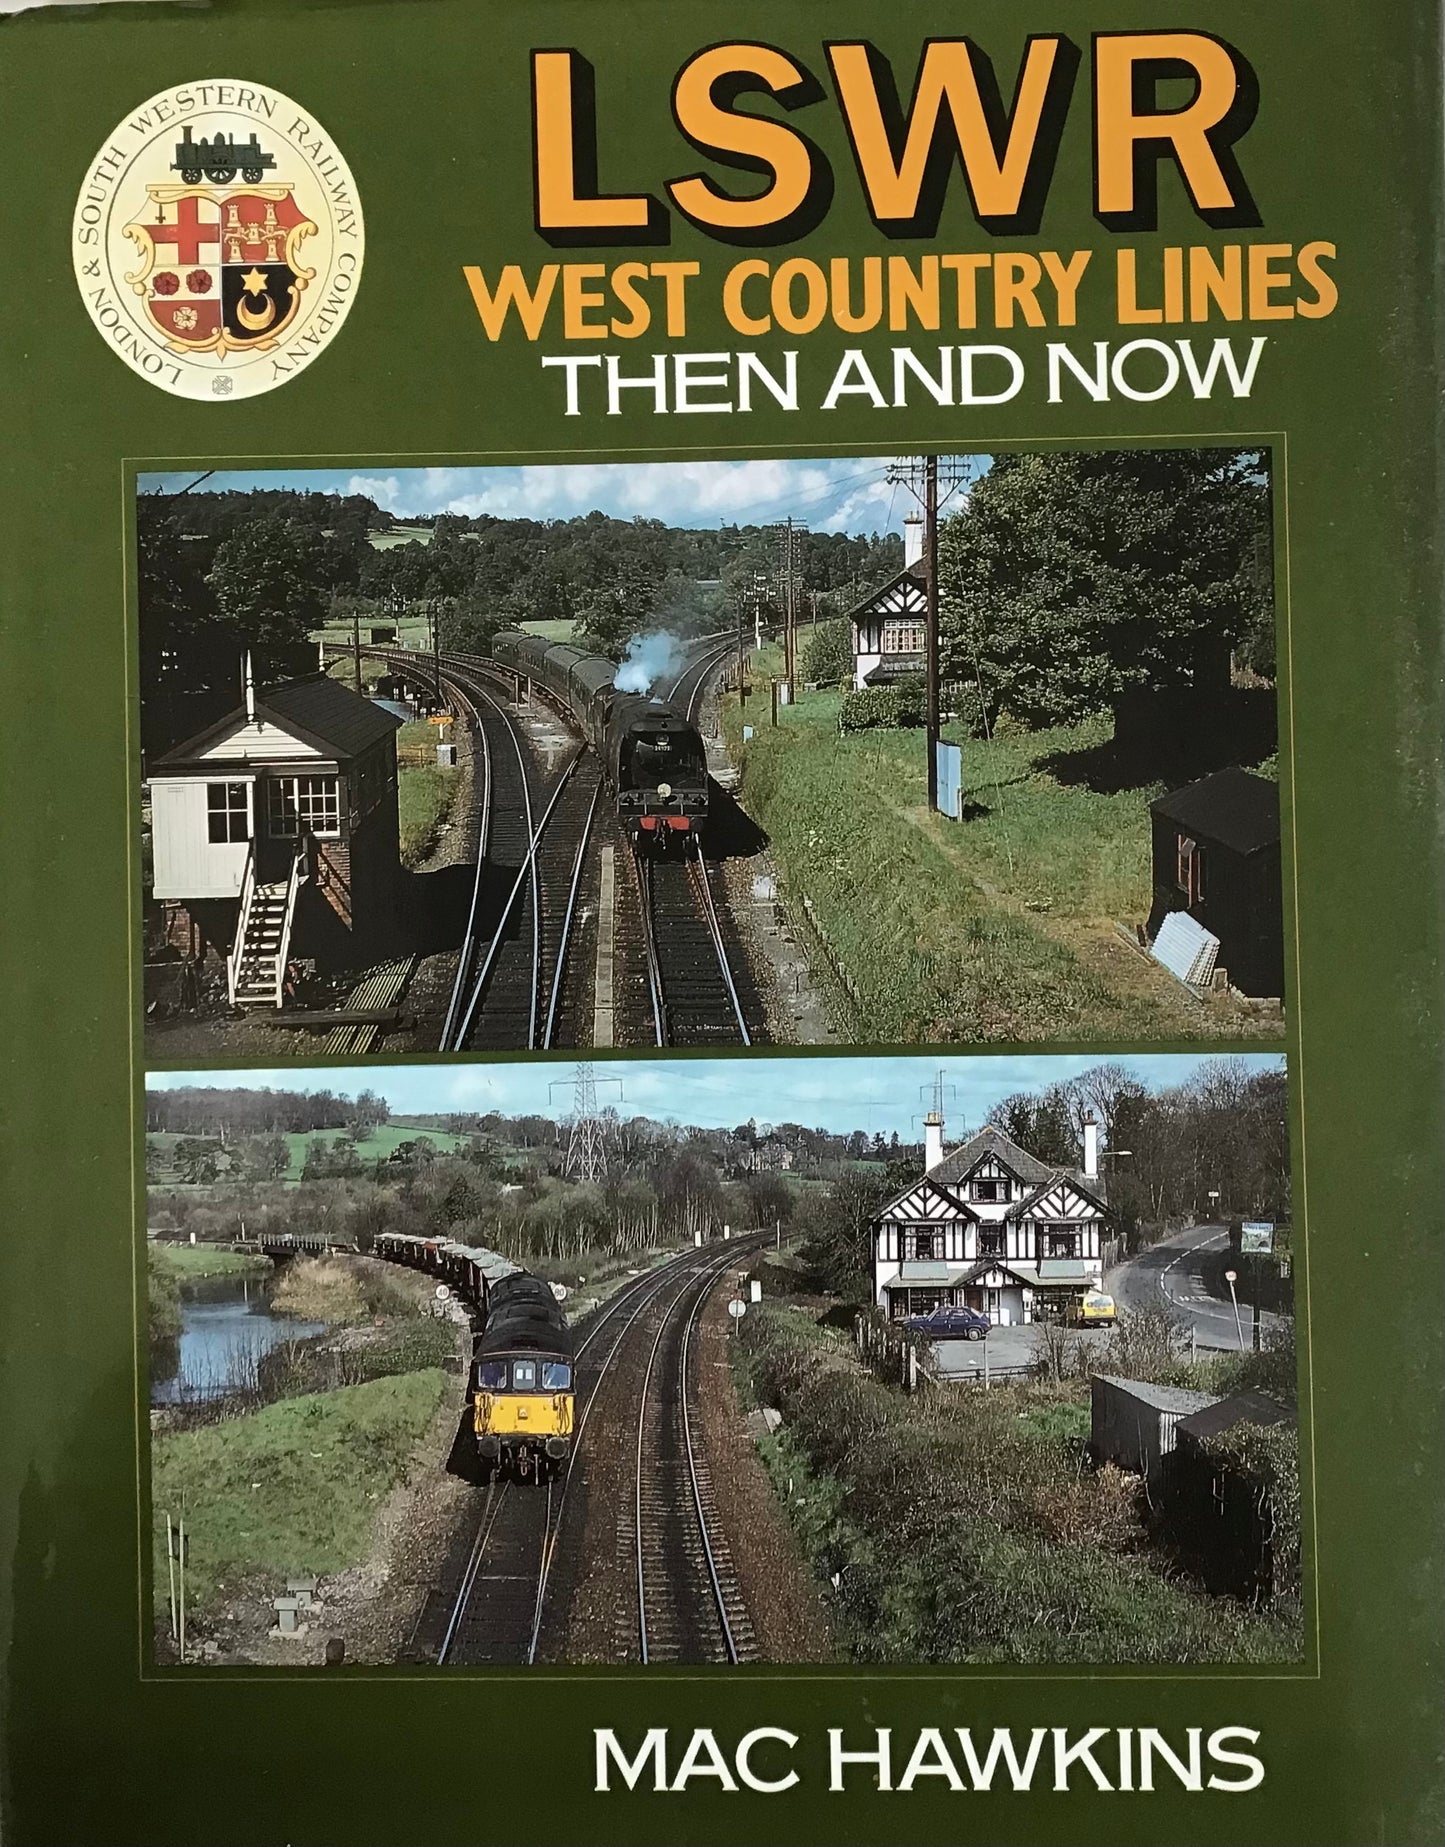 LSWR West Country Lines Then and Now - Mac Hawkins - Chester Model Centre